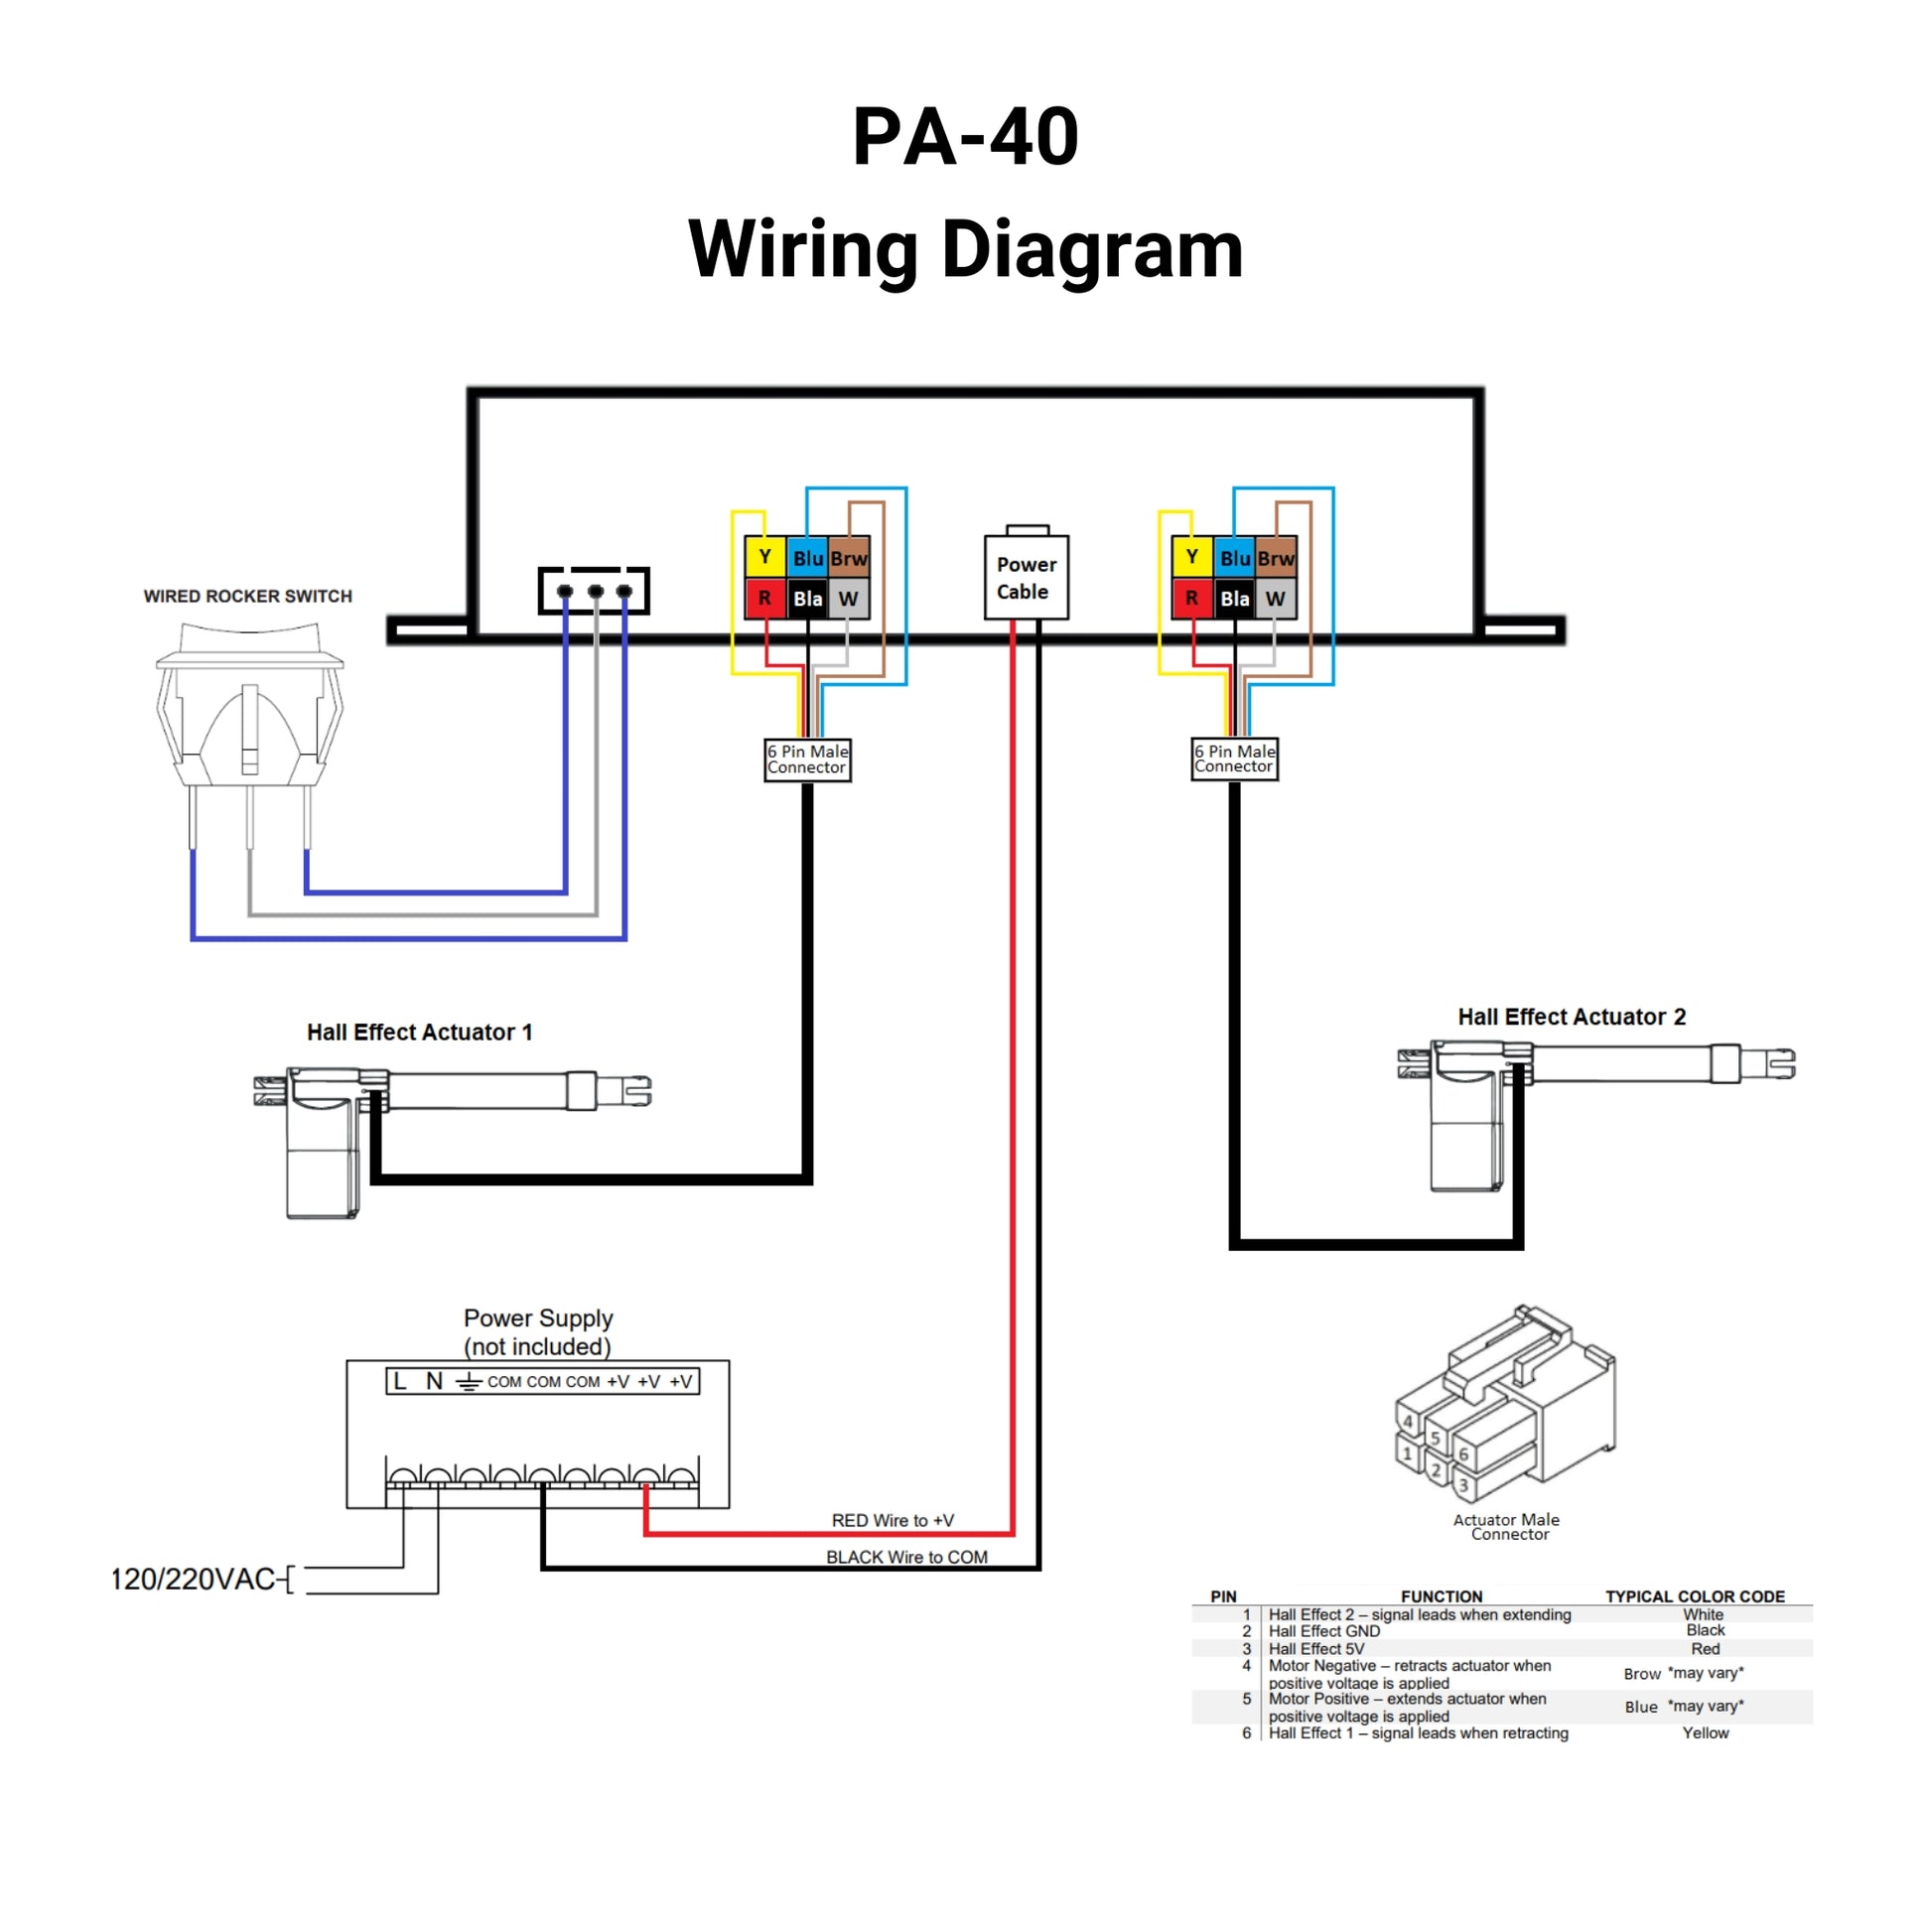 Mounting Bracket for PA-09 and PA-10